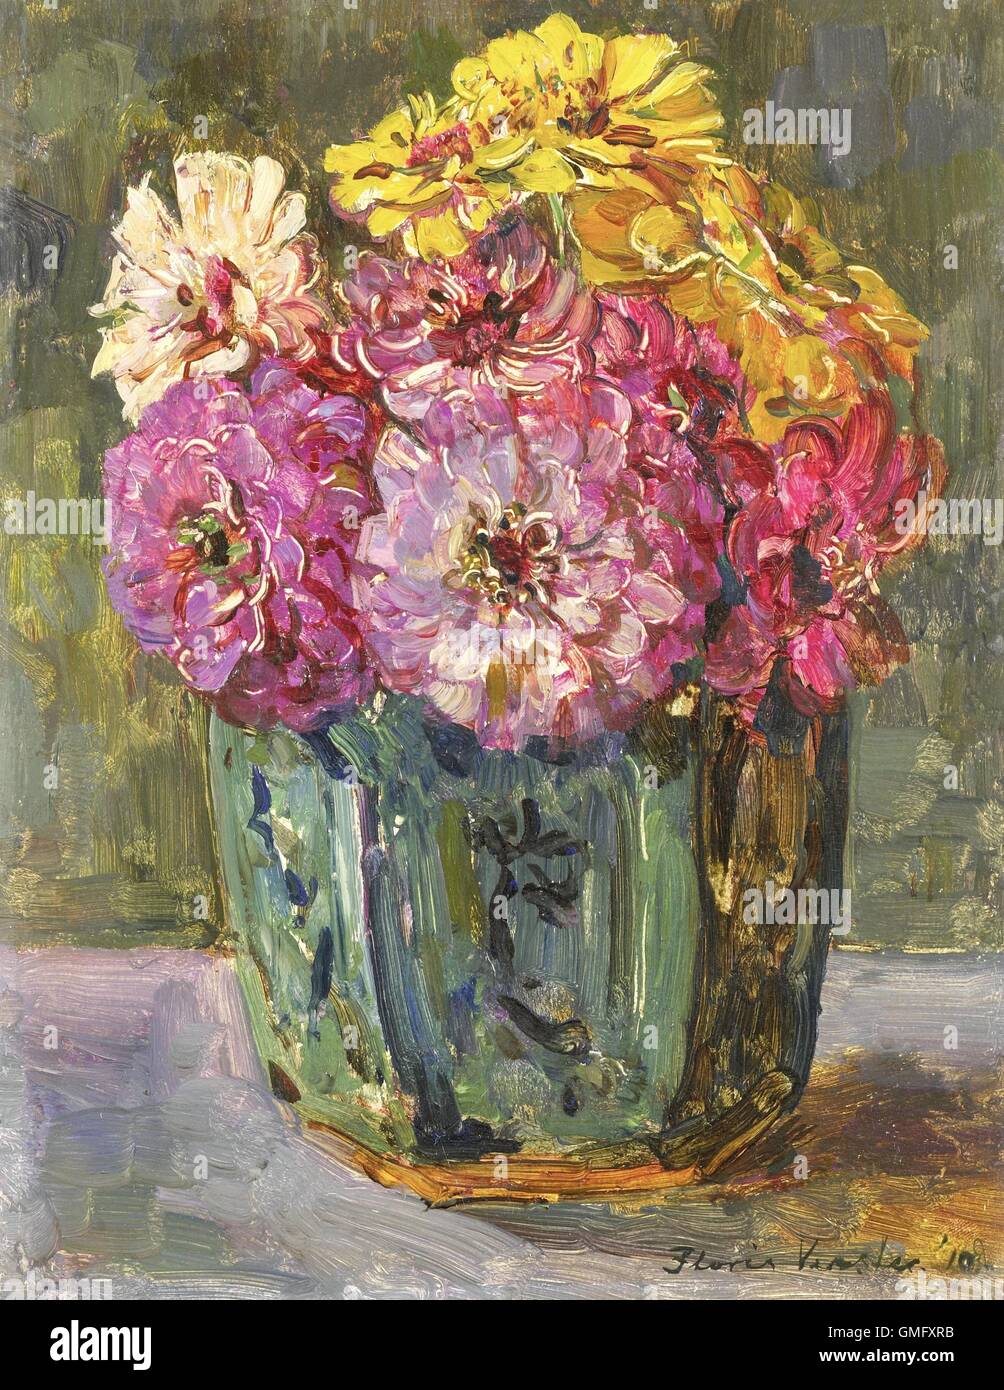 Still Life with Zinnias in a Ginger Pot, by Floris Verster, 1910, Dutch painting, oil on panel (BSLOC 2016 2 286) Stock Photo